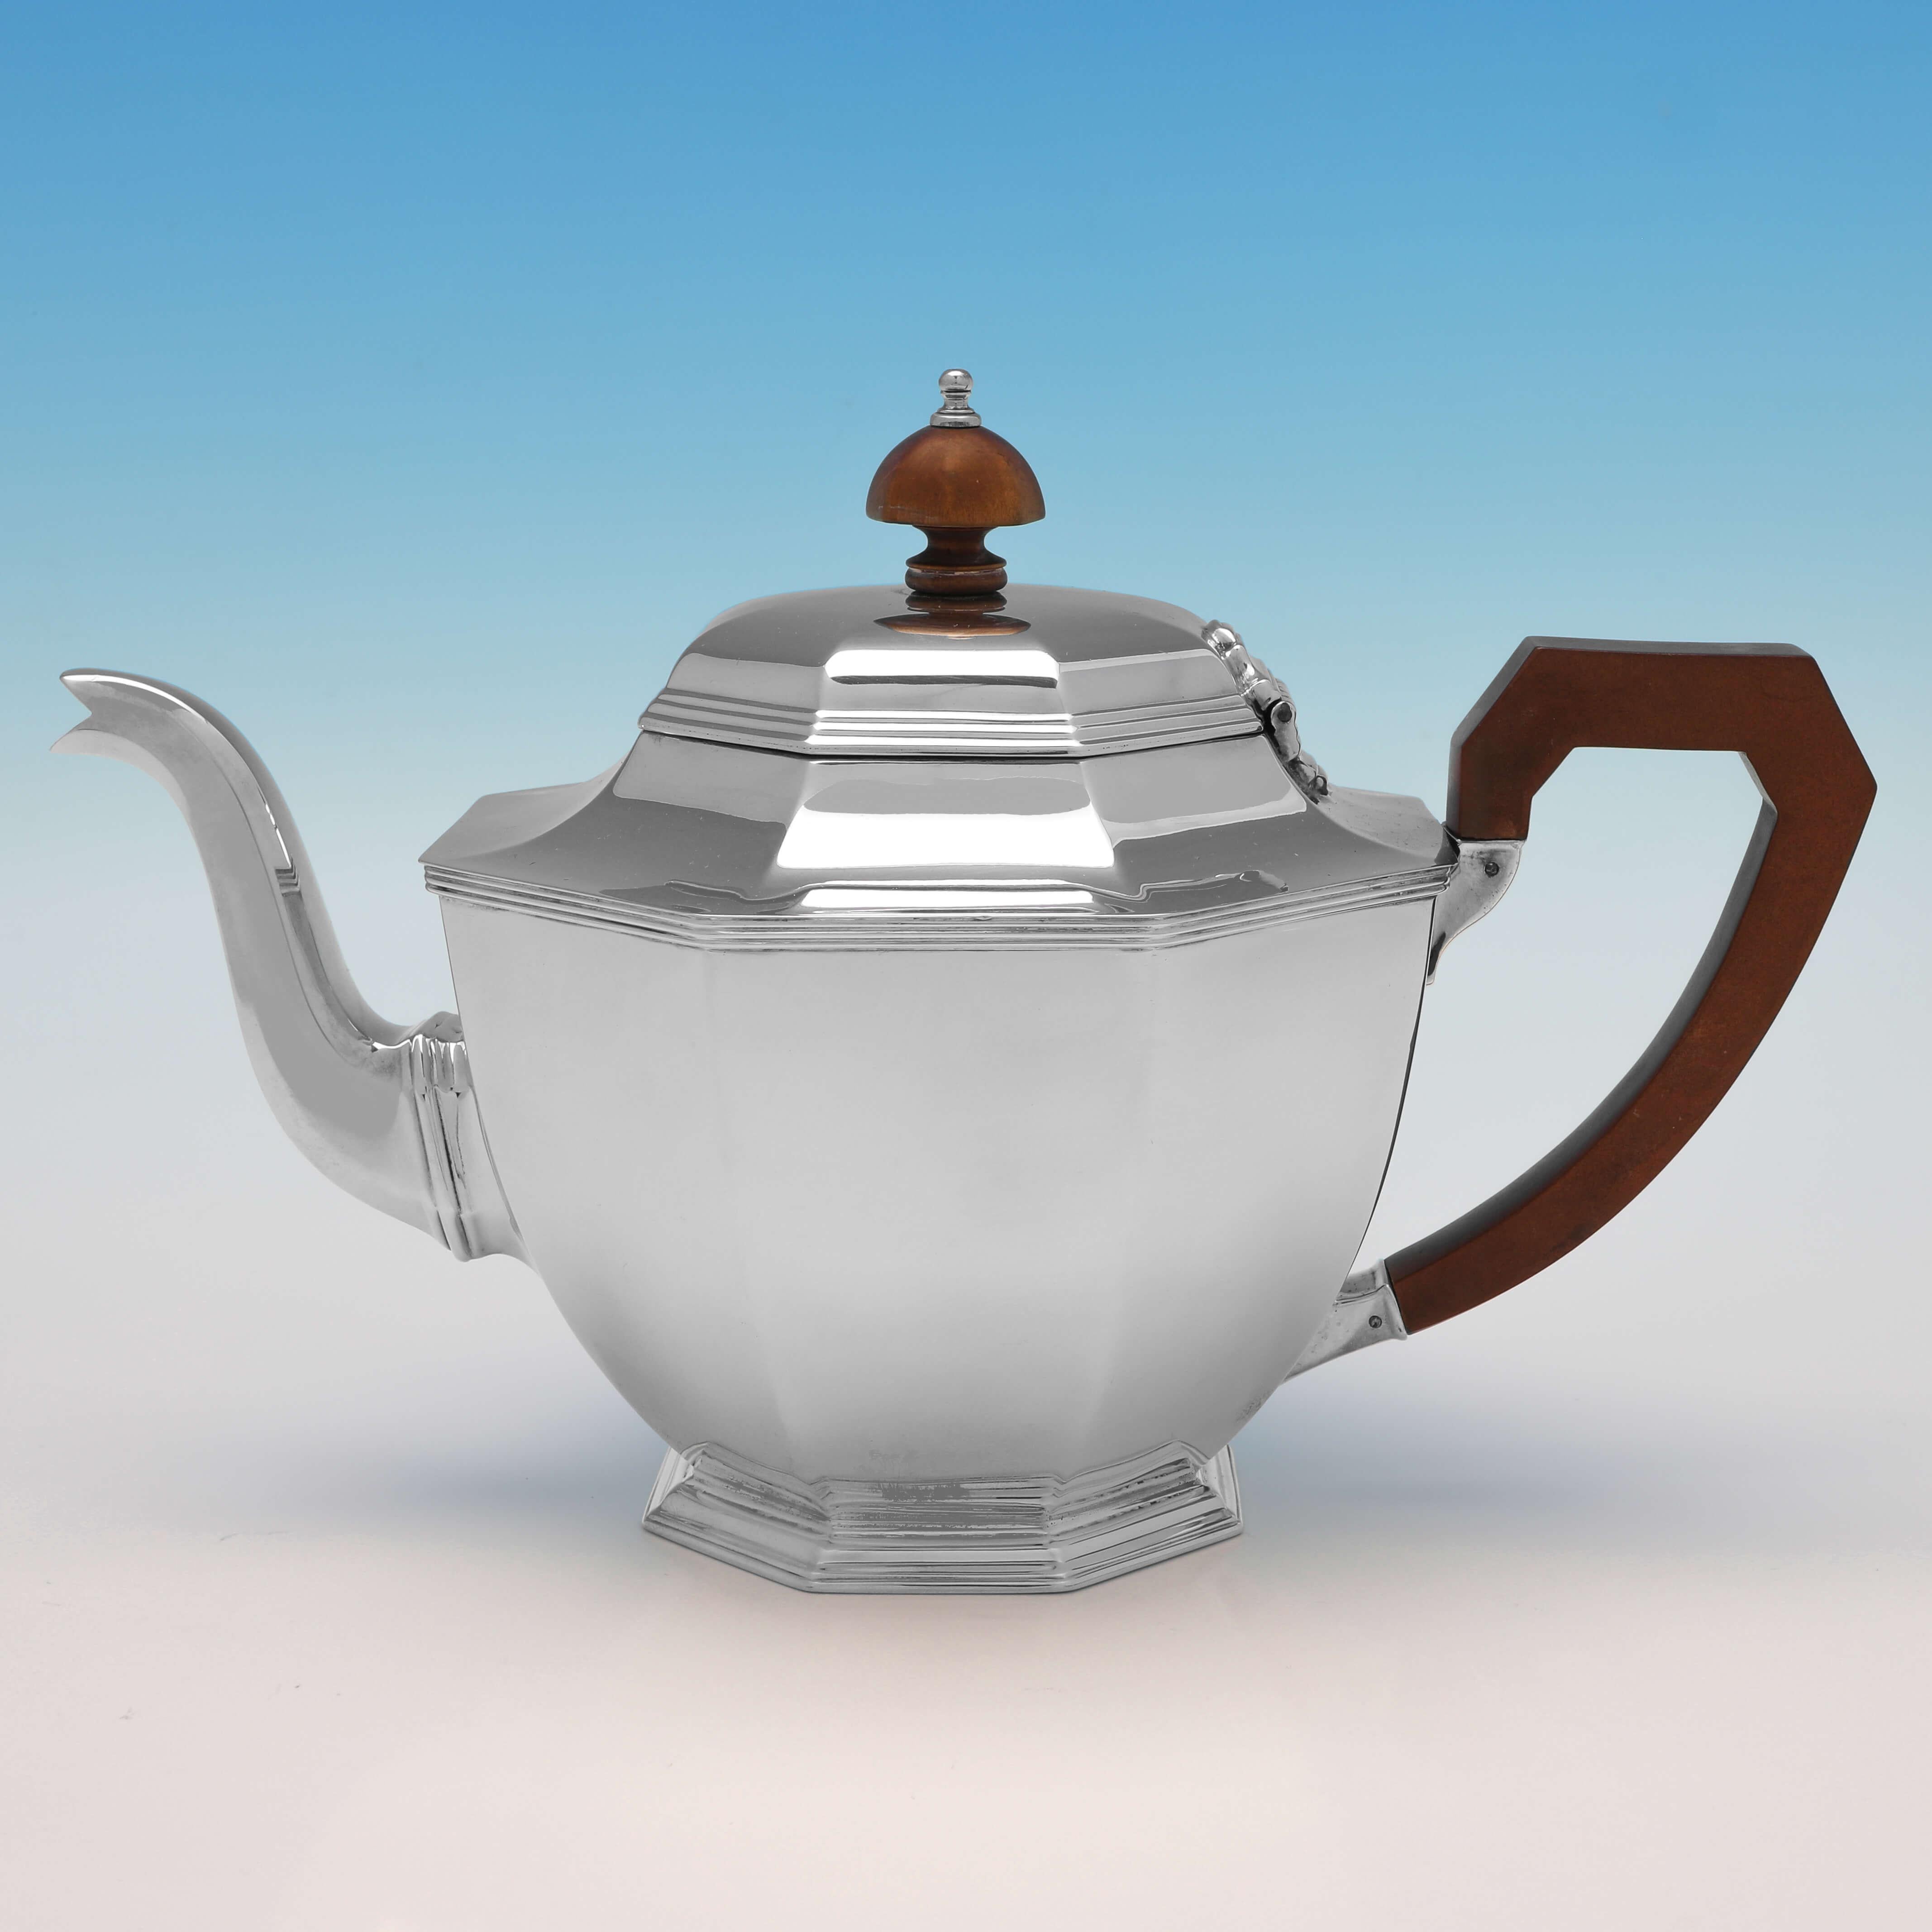 Hallmarked in Birmingham in 1935 by Adie Brothers, this handsome, 4 piece Sterling Silver Tea Set, is in the Art Deco taste and octagonal in shape. The teapot measures 6.25